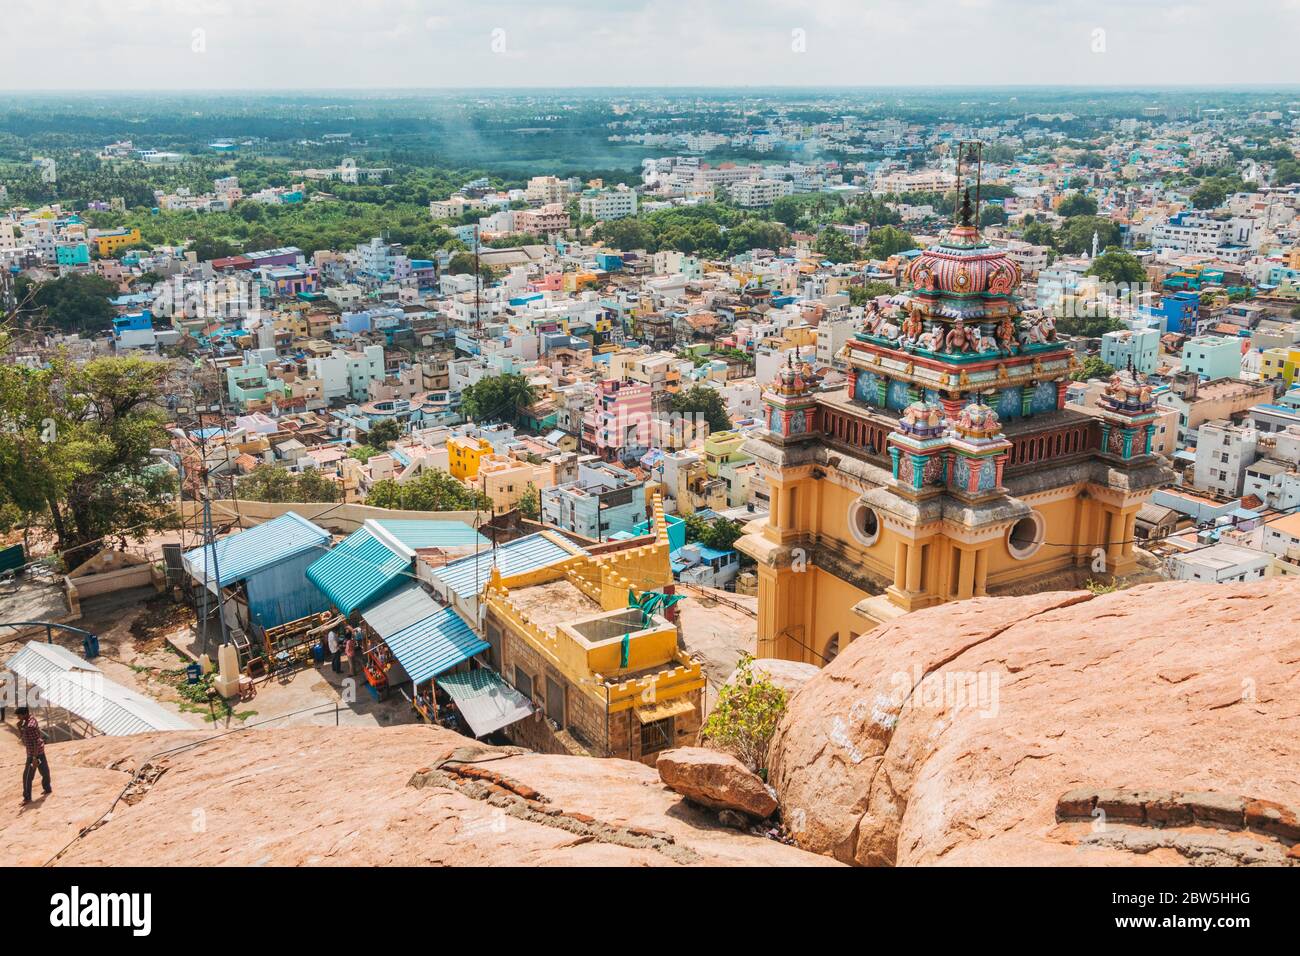 Views out over the colorful city of Tiruchirappalli from the Rock Fort, Thayumanaswami Temple can be seen in the foreground Stock Photo